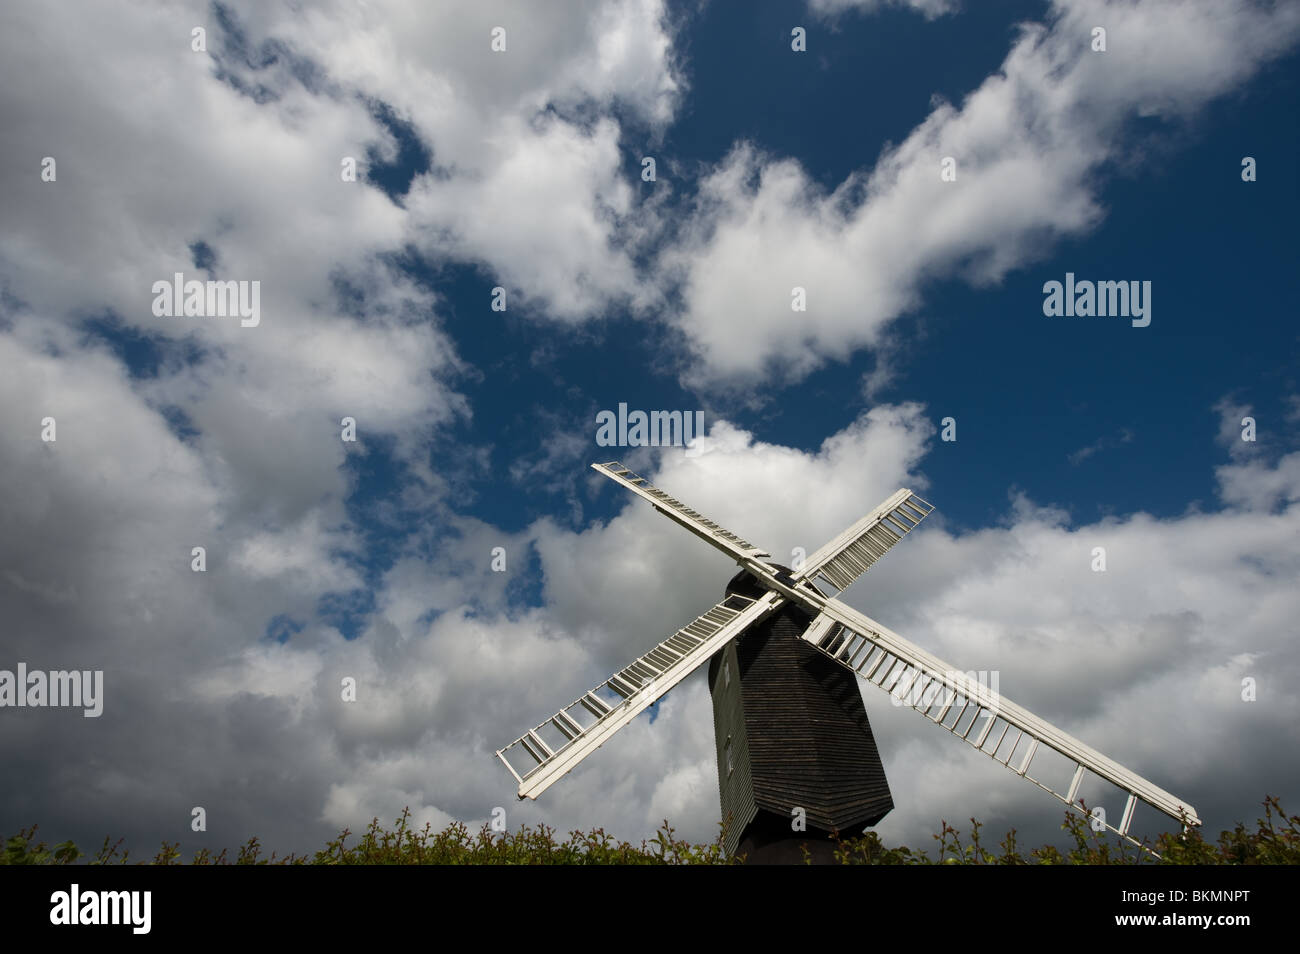 working post windmill in Mountnessing, Essex, England, United Kingdom Stock Photo